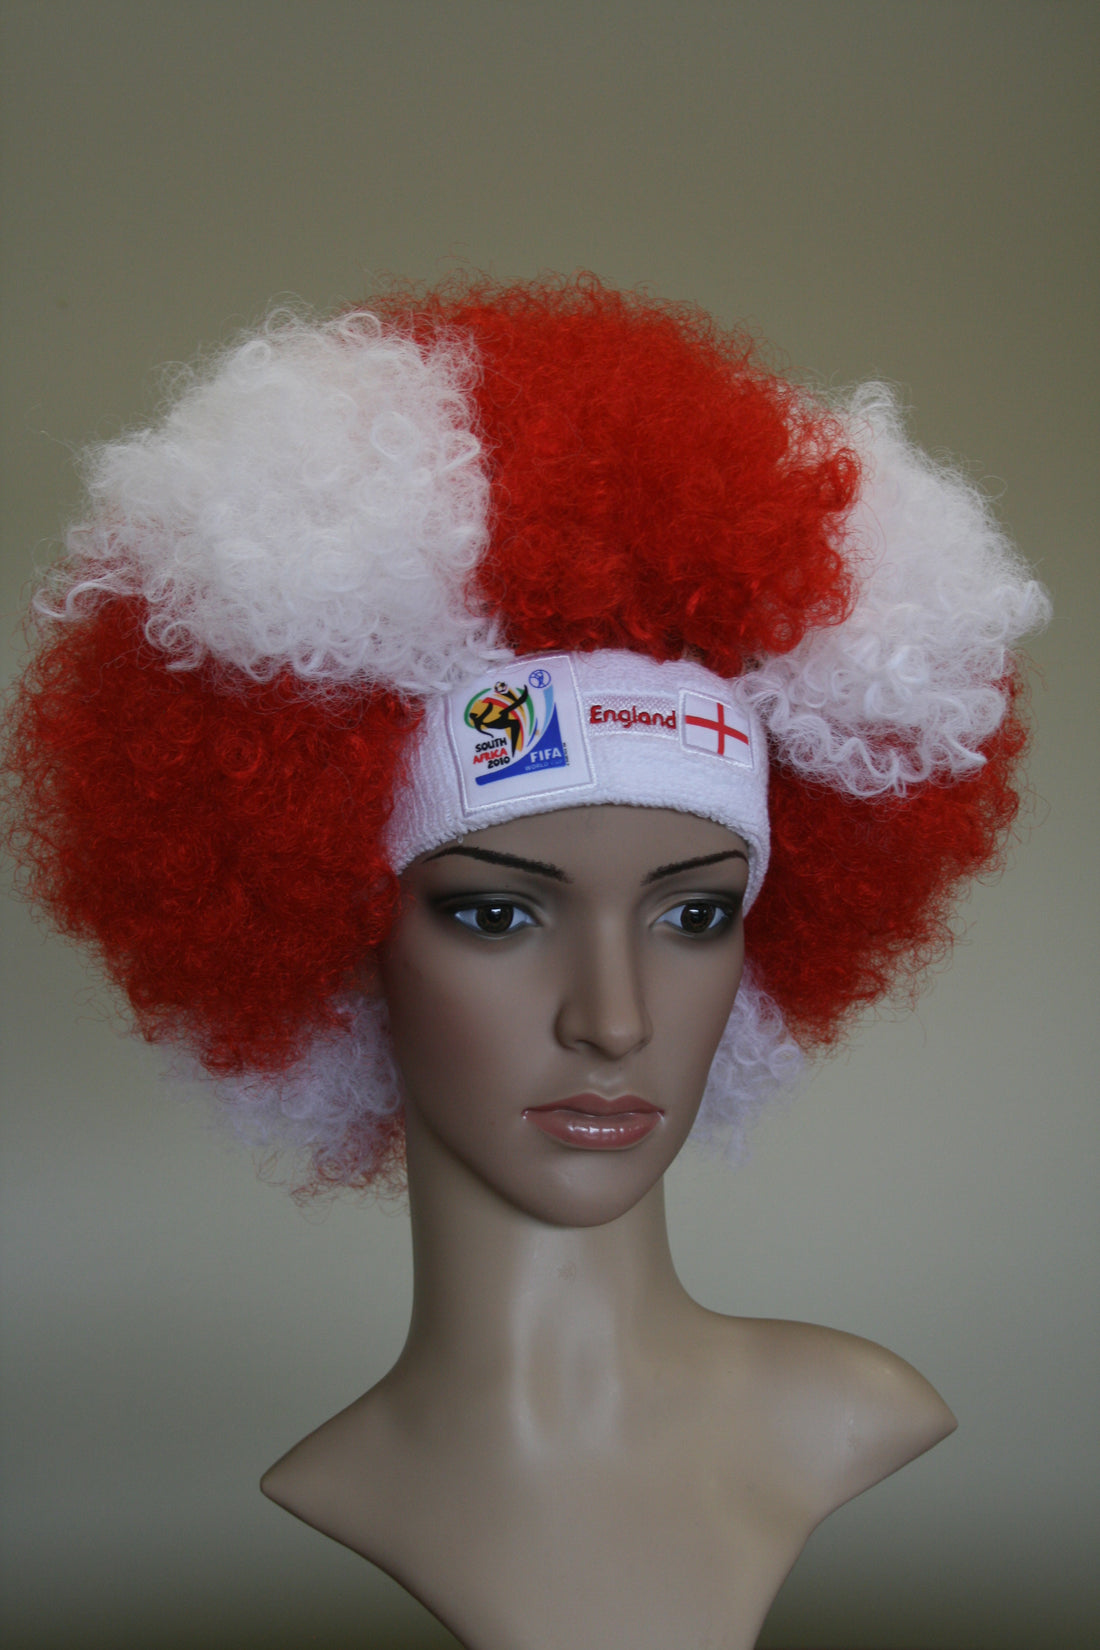 Fifa World Cup wigs